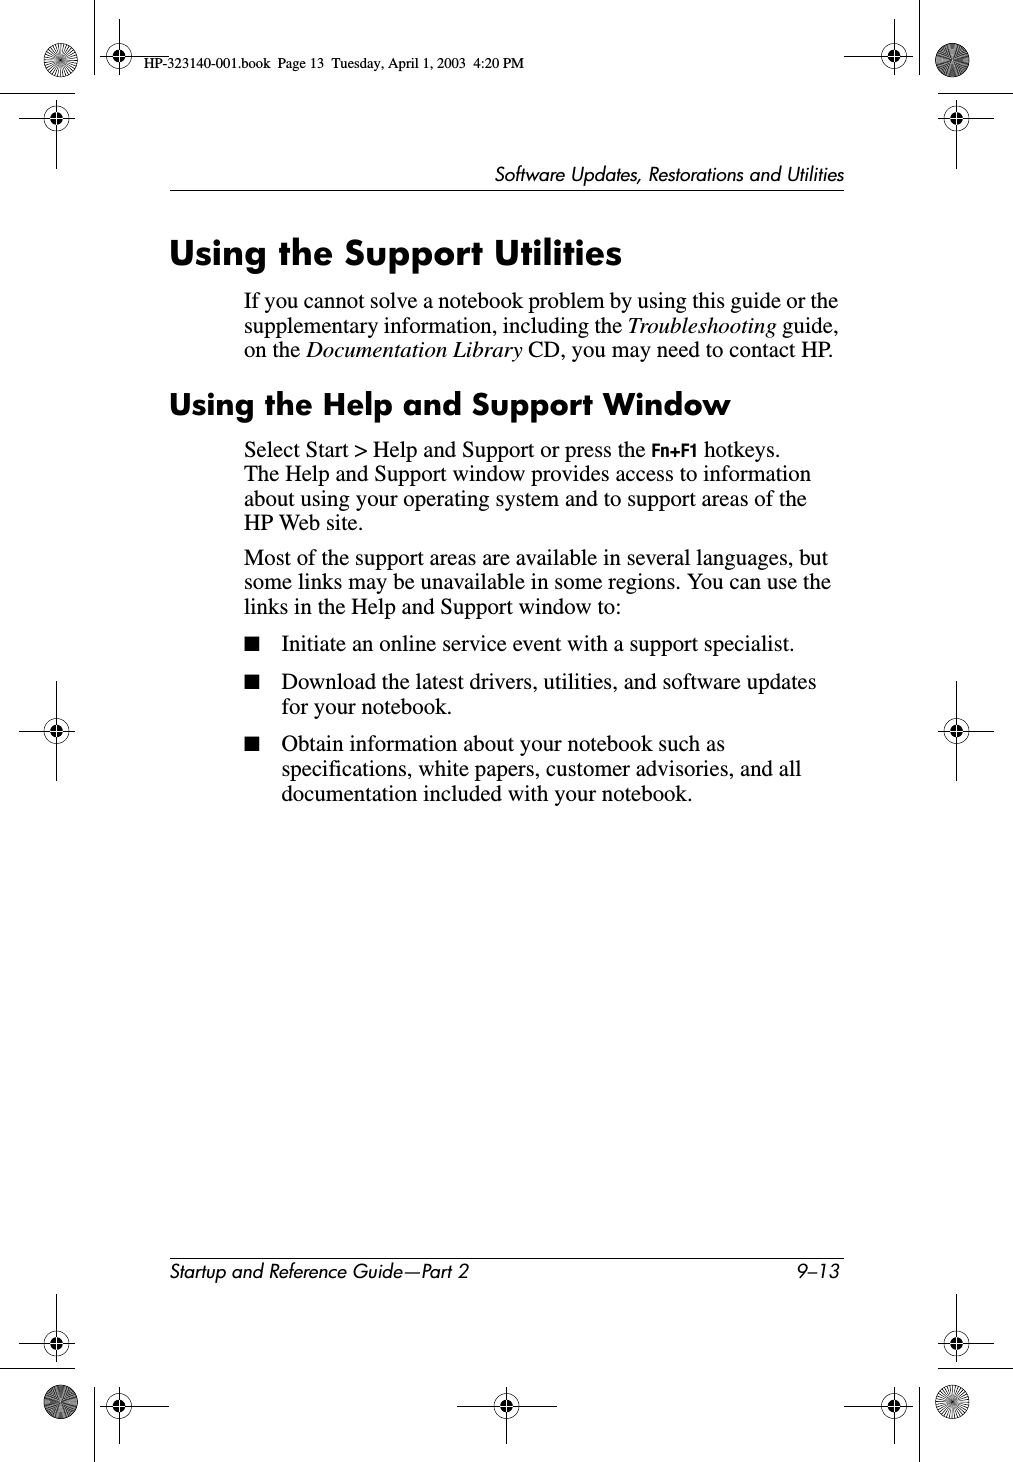 Software Updates, Restorations and UtilitiesStartup and Reference Guide—Part 2 9–13Using the Support UtilitiesIf you cannot solve a notebook problem by using this guide or the supplementary information, including the Troubleshooting guide, on the Documentation Library CD, you may need to contact HP.Using the Help and Support WindowSelect Start &gt; Help and Support or press the Fn+F1 hotkeys. The Help and Support window provides access to information about using your operating system and to support areas of the HP Web site.Most of the support areas are available in several languages, but some links may be unavailable in some regions. You can use the links in the Help and Support window to:■Initiate an online service event with a support specialist.■Download the latest drivers, utilities, and software updates for your notebook.■Obtain information about your notebook such as specifications, white papers, customer advisories, and all documentation included with your notebook.HP-323140-001.book  Page 13  Tuesday, April 1, 2003  4:20 PM